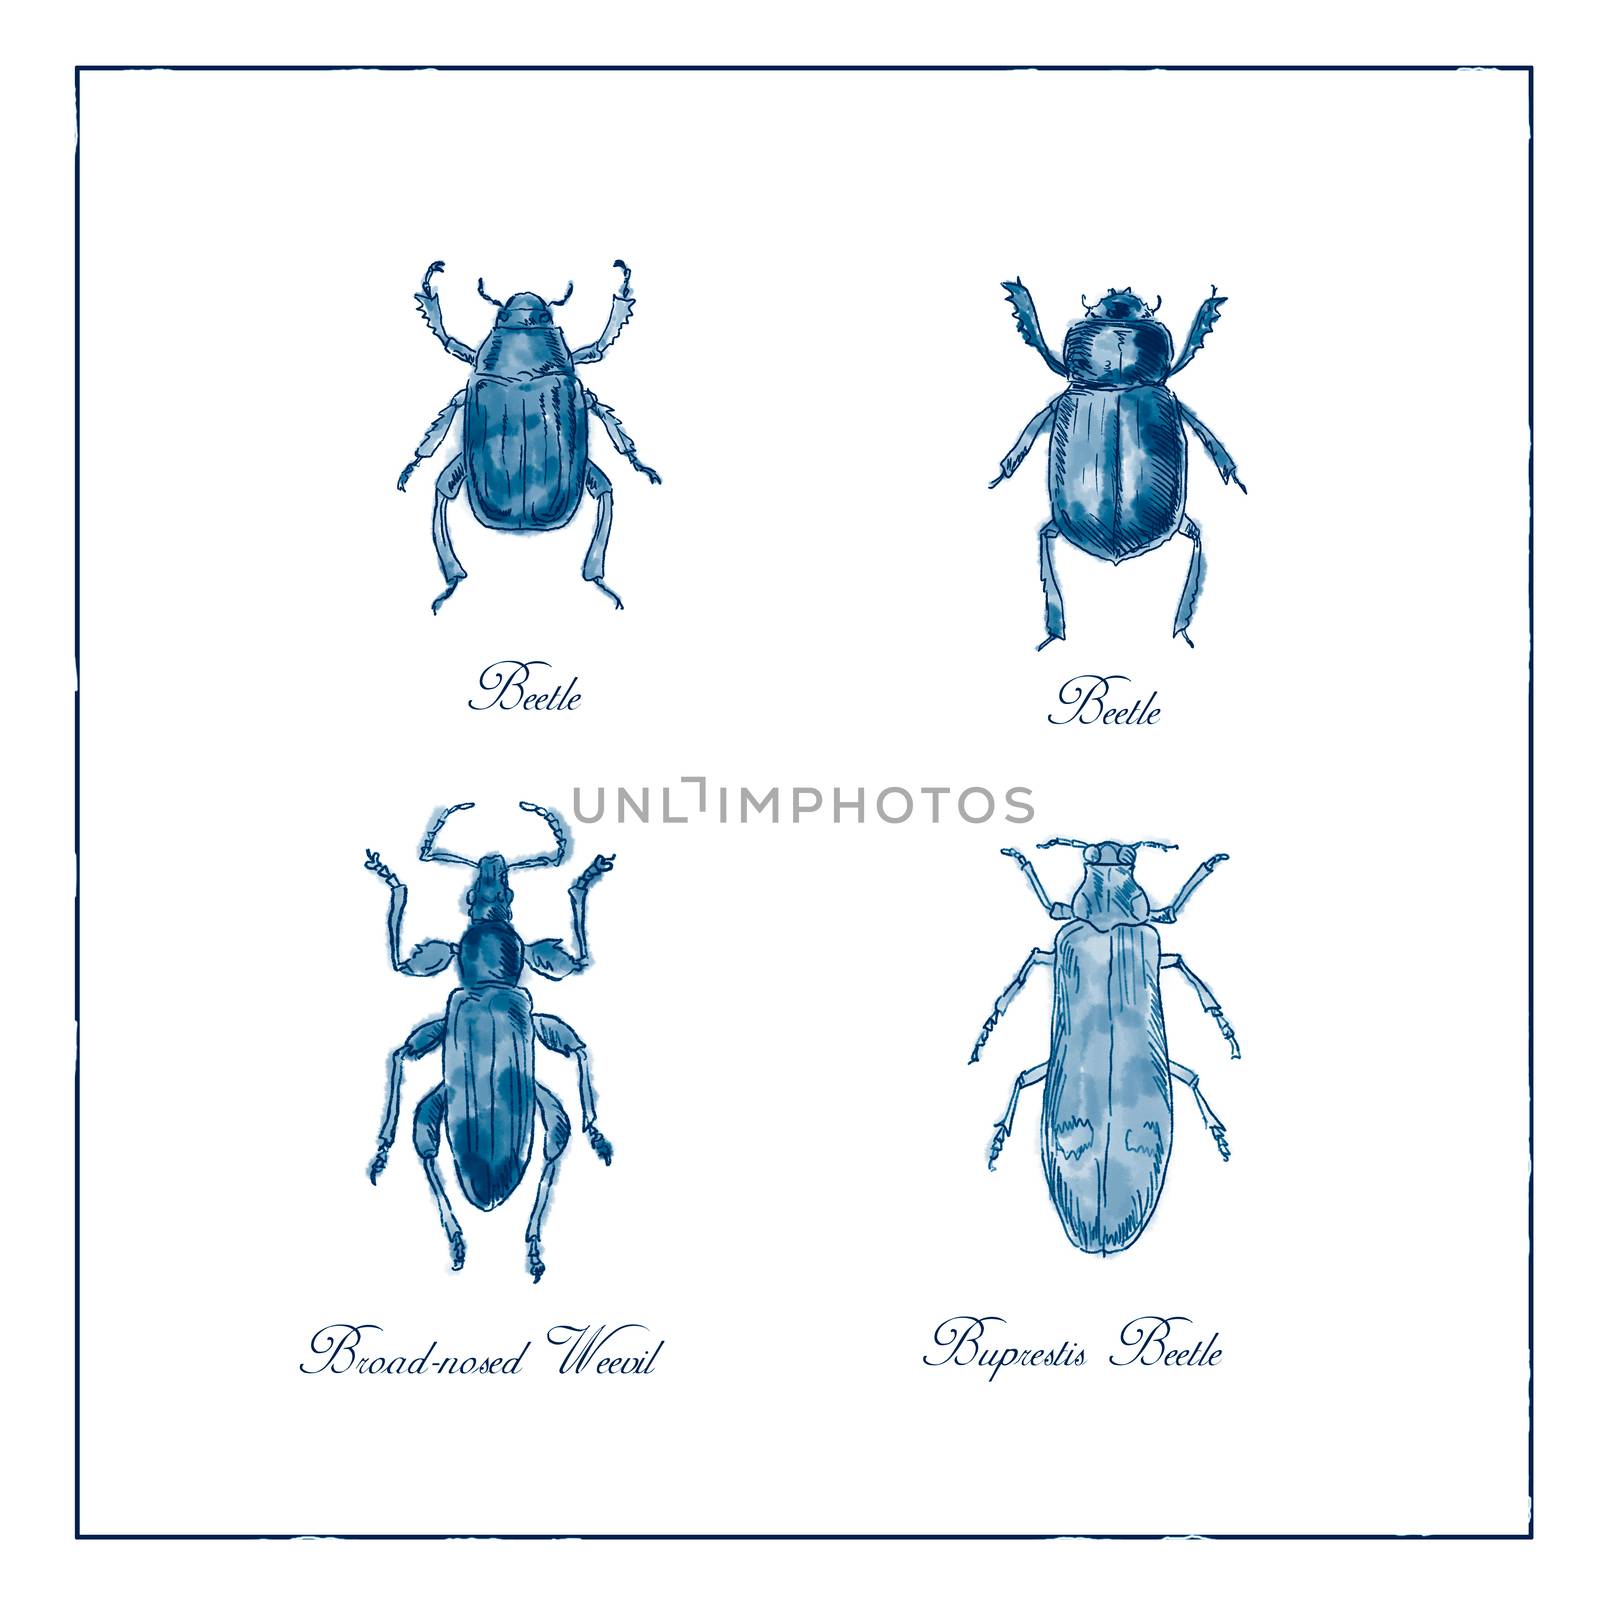 Vintage Victorian drawing illustration of a collection of insects like the Beetle, Broad-Nosed Weevil and Buprestis Beetle duotone on isolated white background.